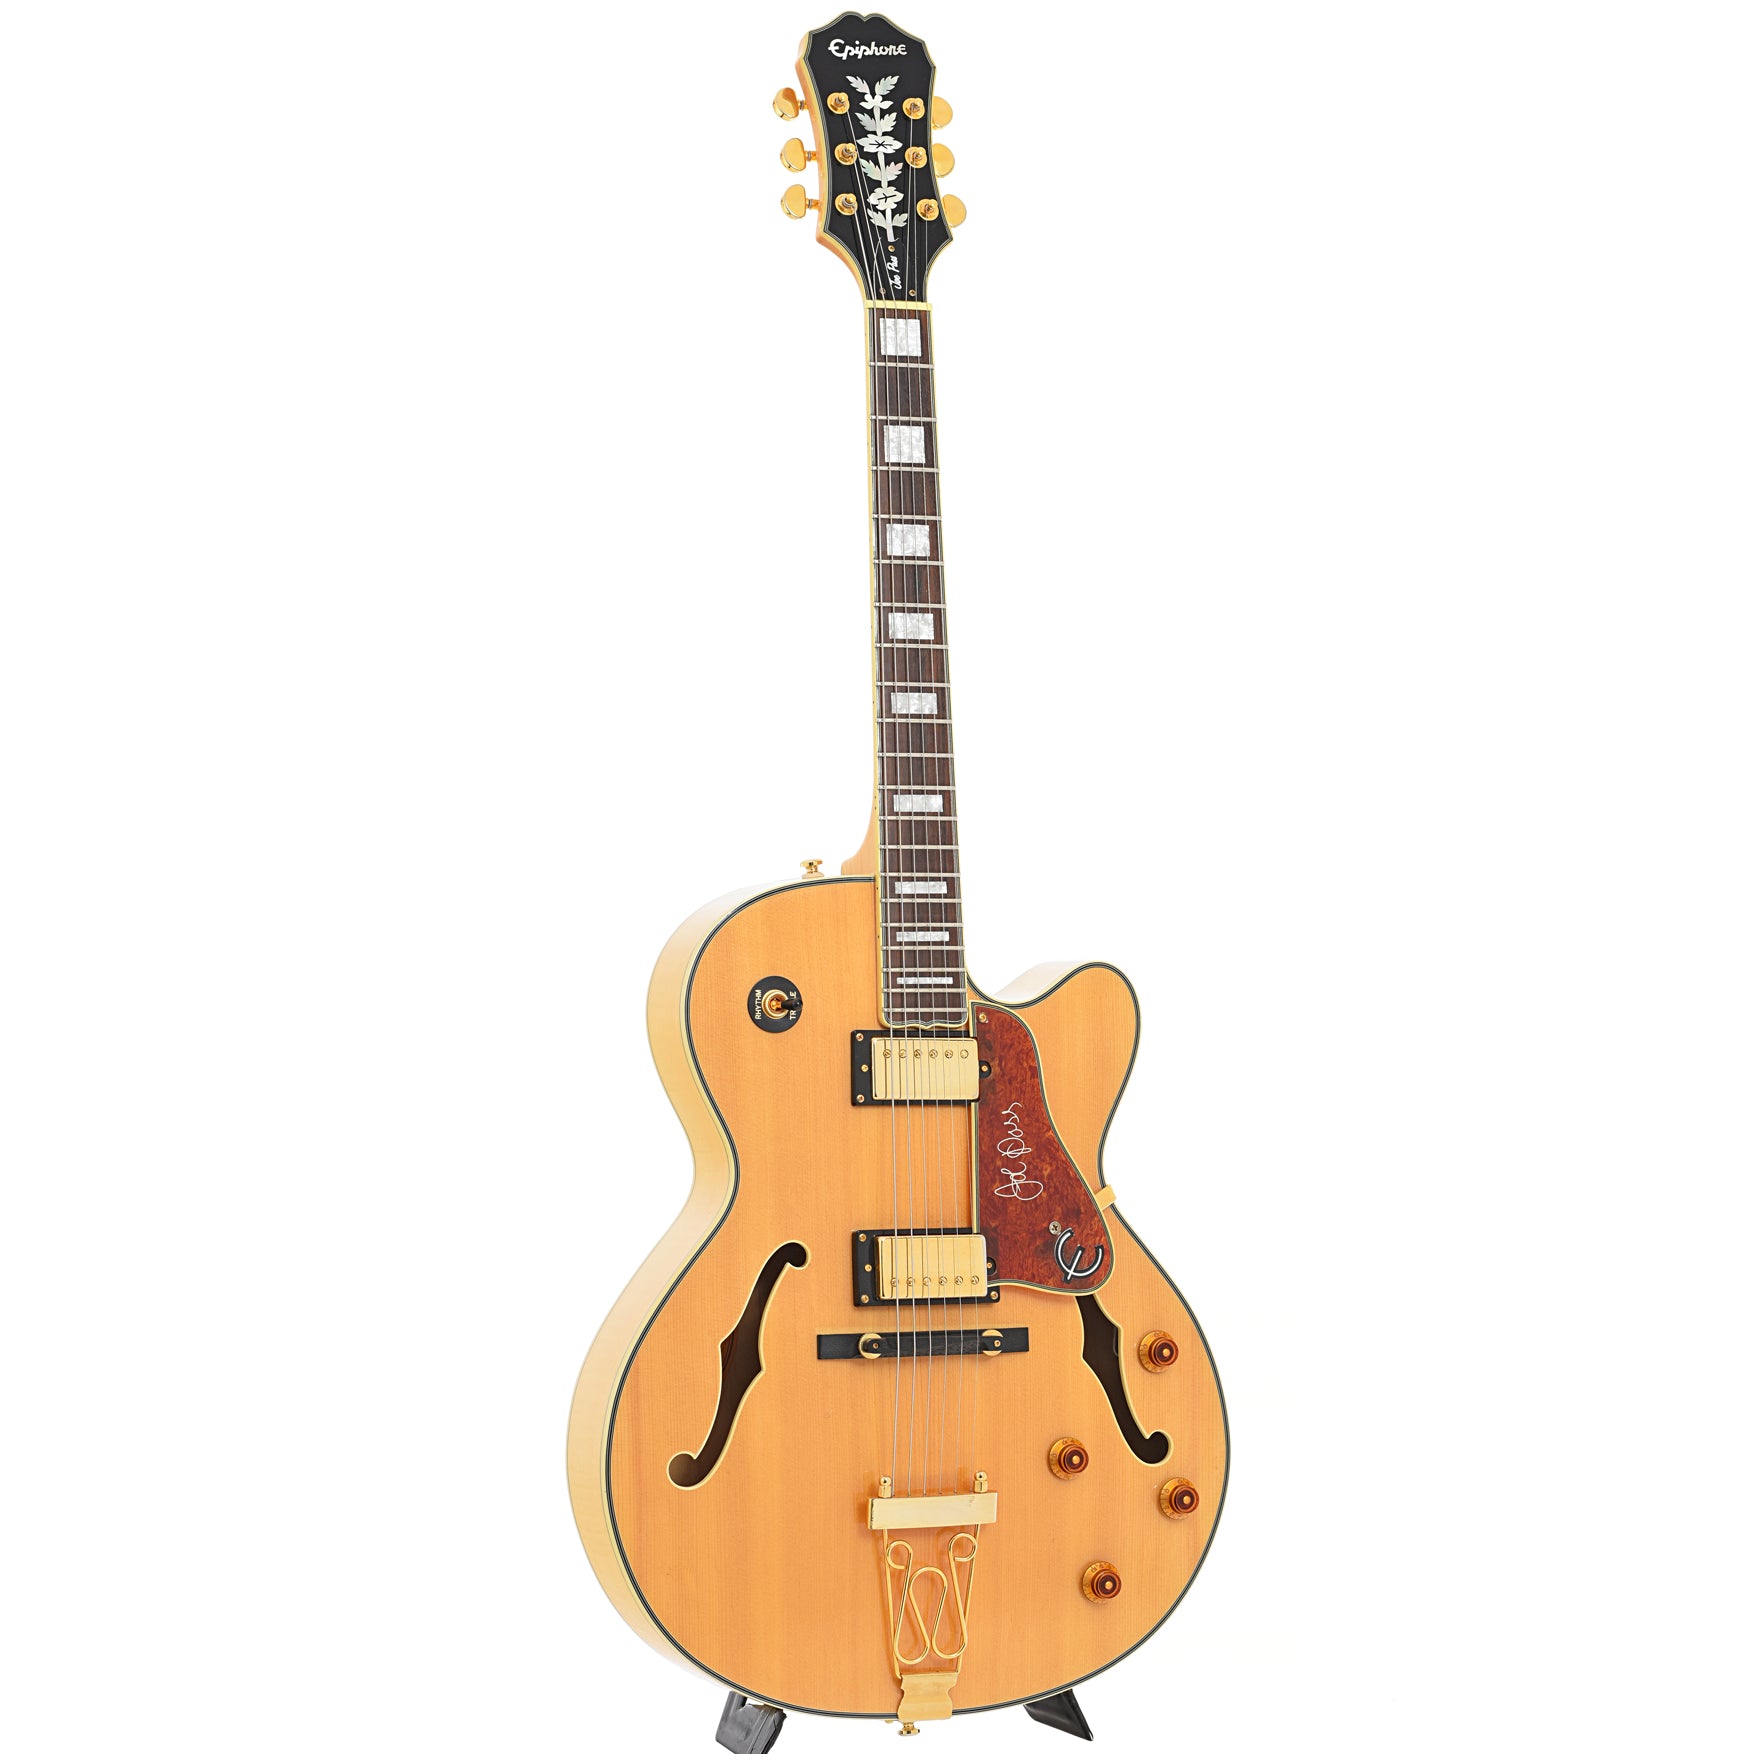 Full front and side of Epiphone Joe Pass Emperor II-NA Hollowbody Electric Guitar